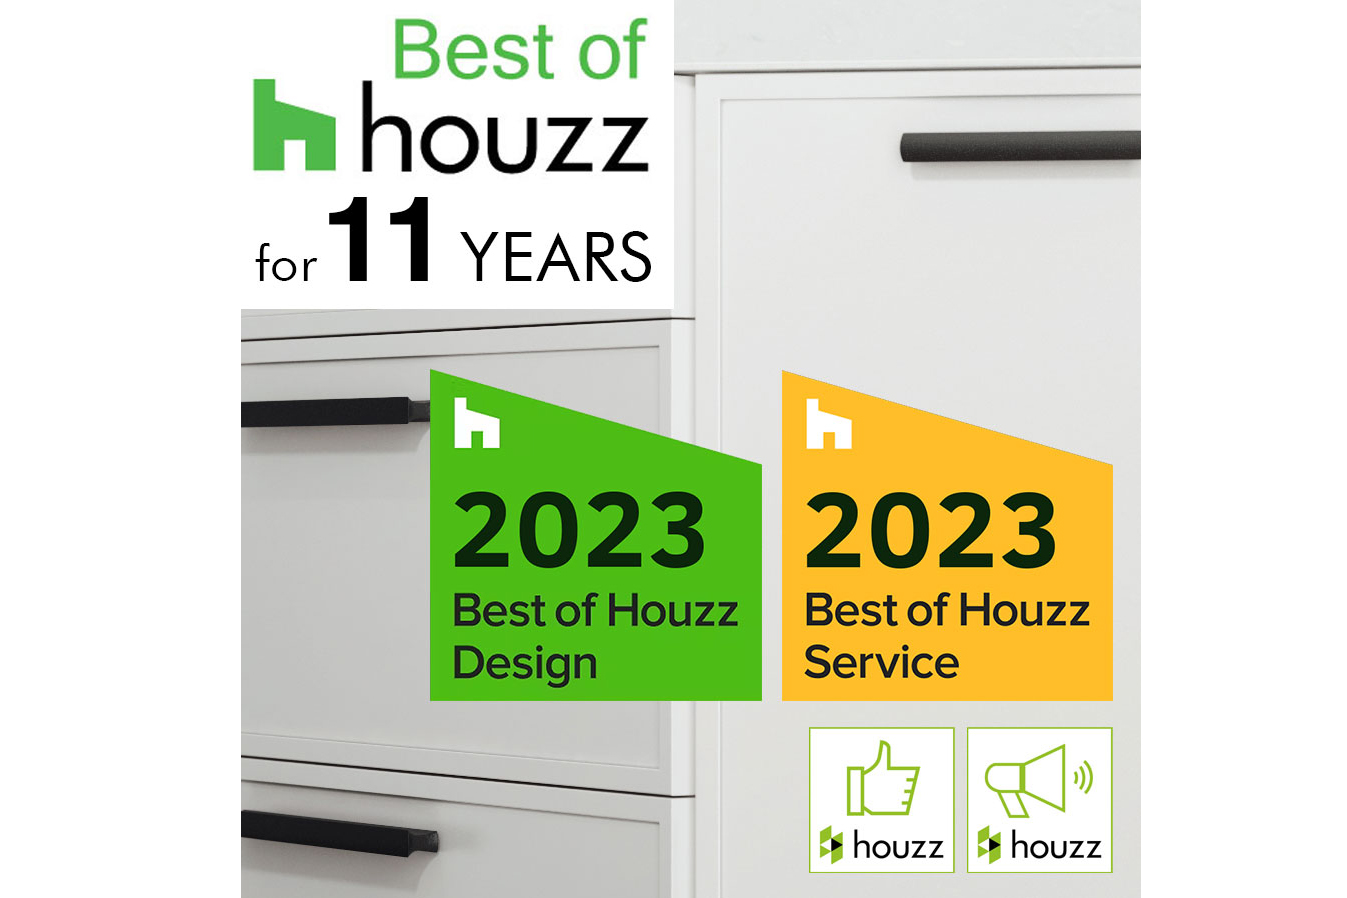 Best of Houzz for 11 years in a row. Best of service and Best of Design.